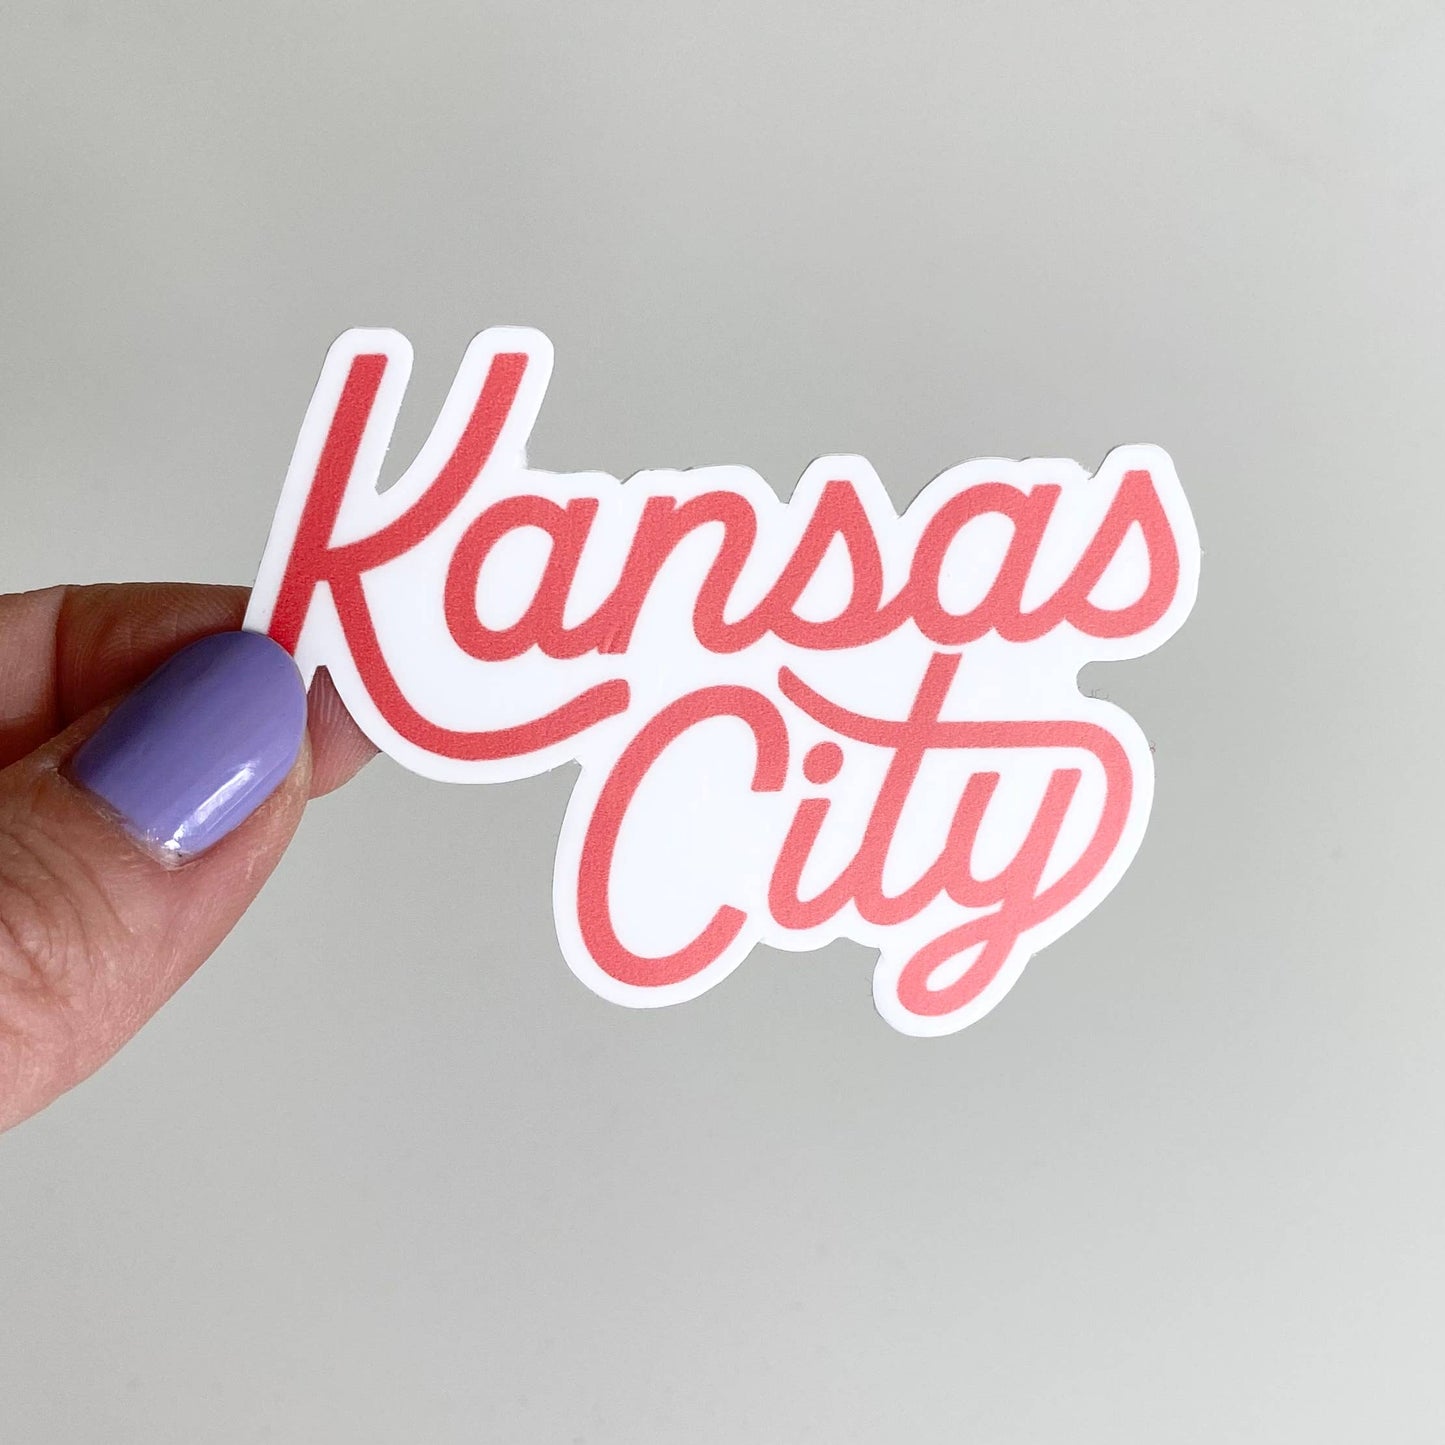 Load image into Gallery viewer, Kansas City Script Watercolor Sticker
